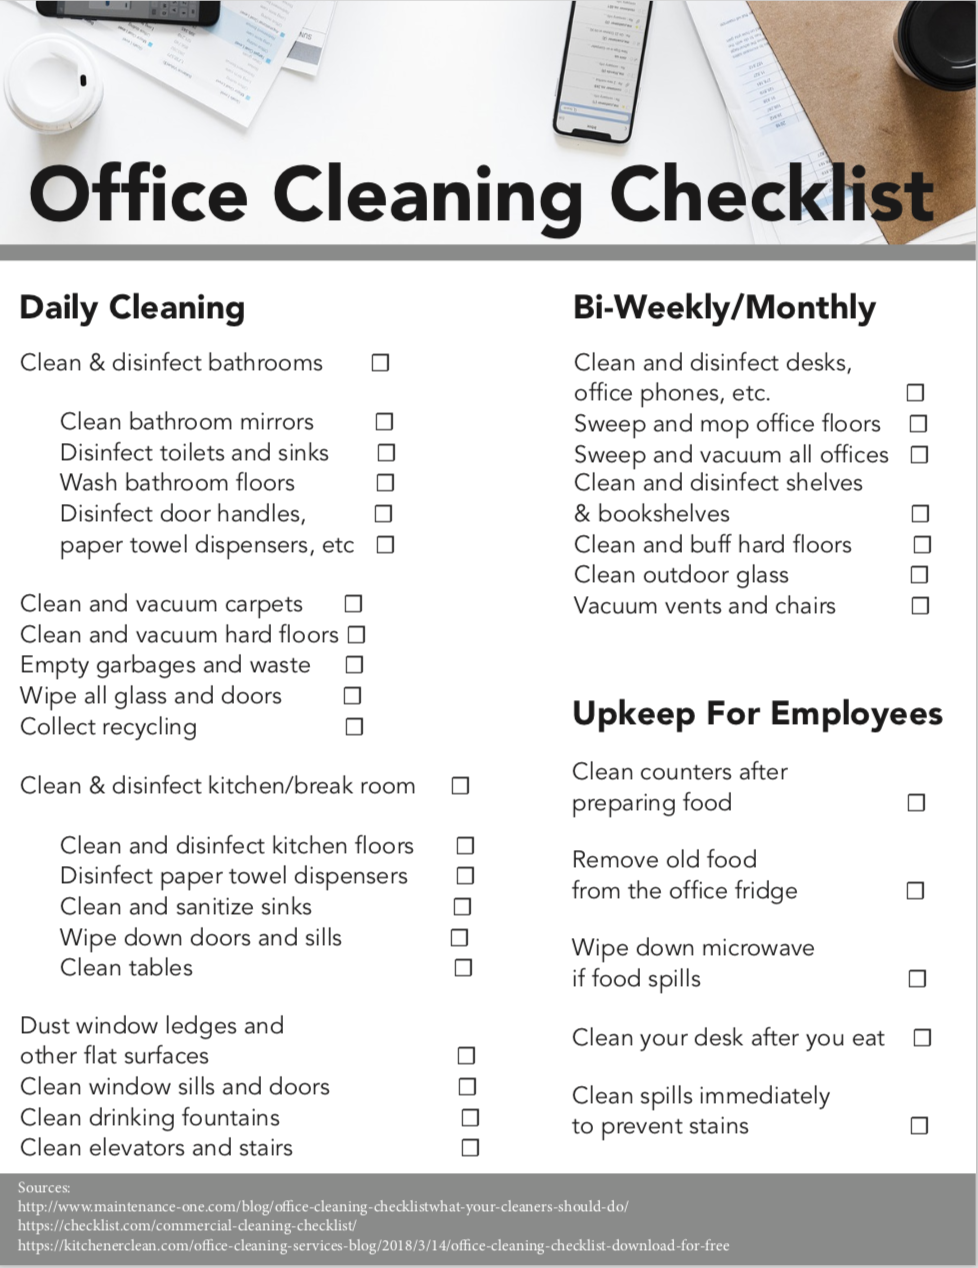 bathroom-cleaning-schedule-bathroom-cleaning-checklist-cleaning-chart